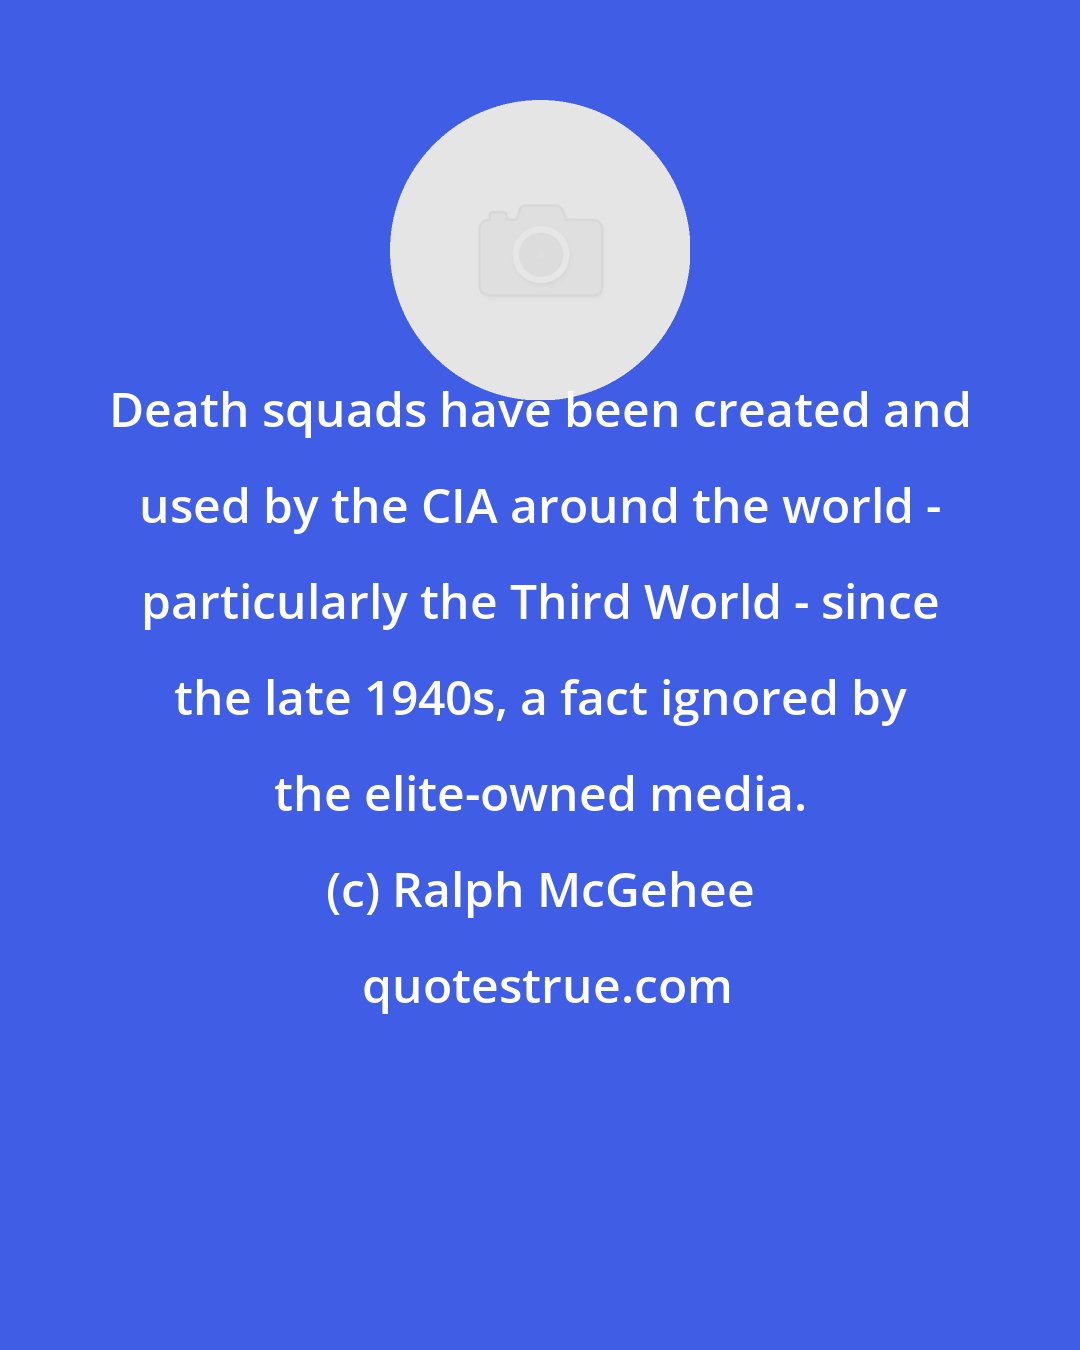 Ralph McGehee: Death squads have been created and used by the CIA around the world - particularly the Third World - since the late 1940s, a fact ignored by the elite-owned media.